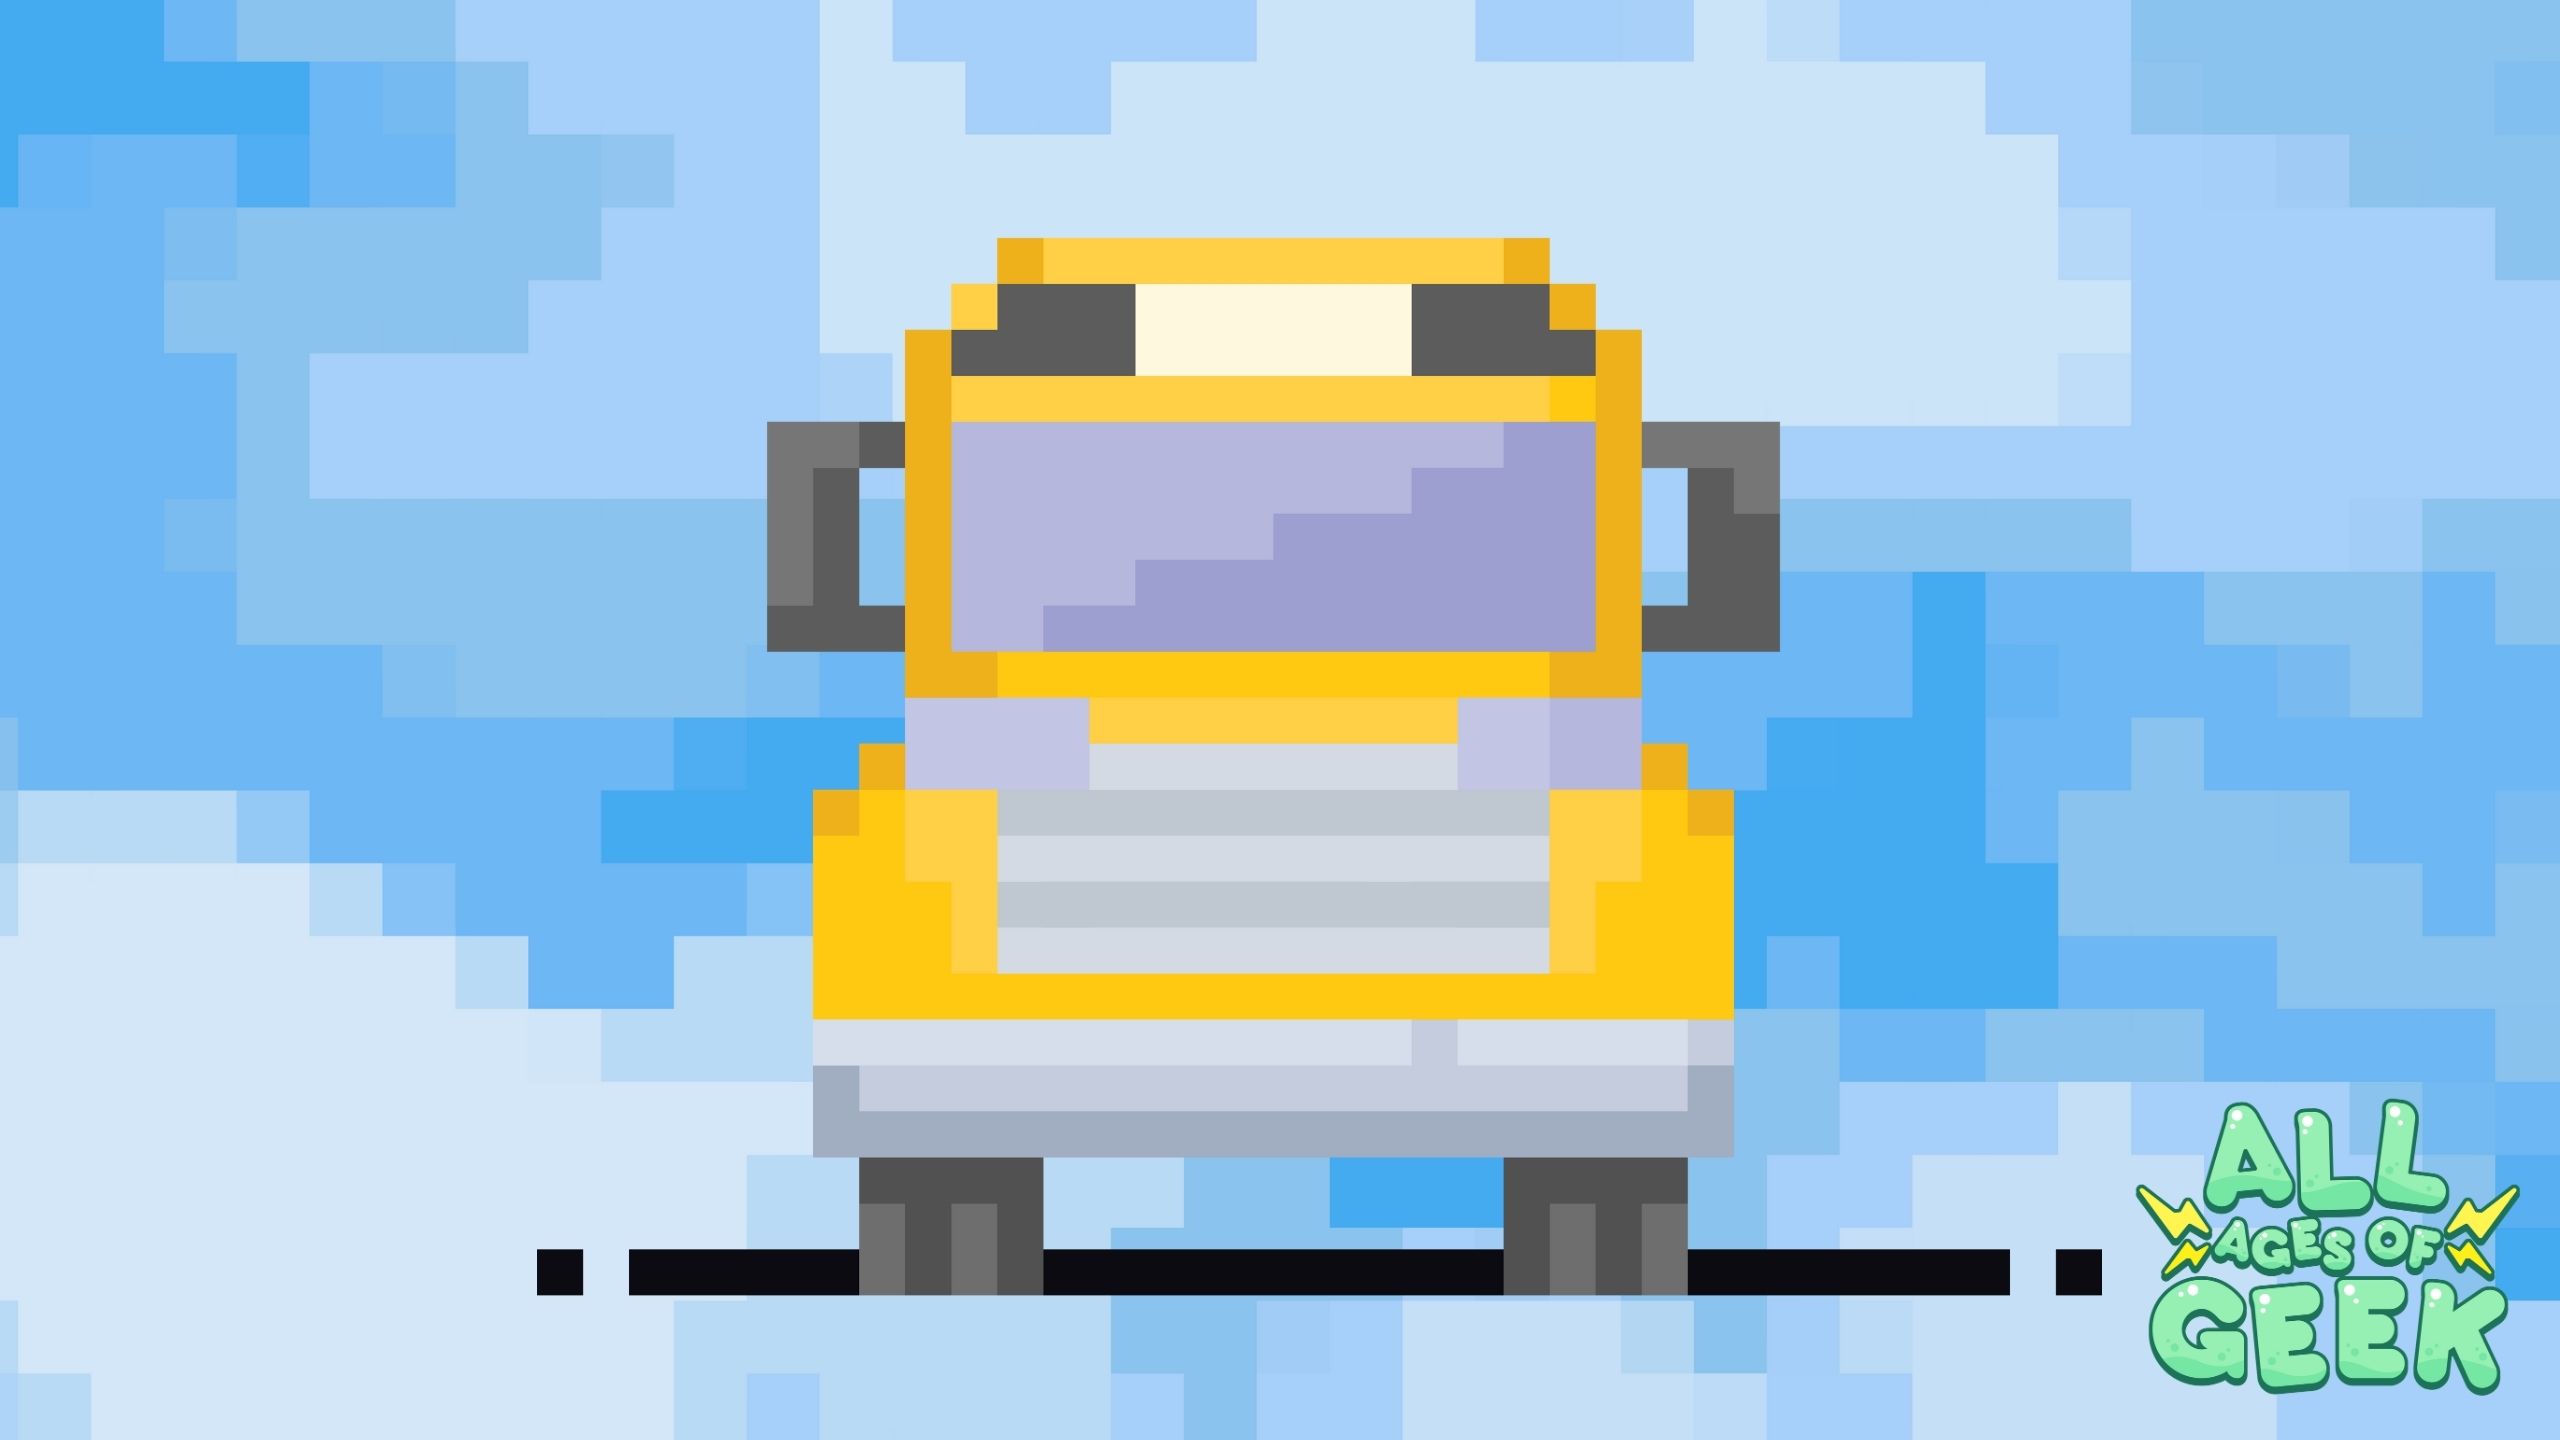 Pixel art illustration of a yellow bus against a pixelated blue sky background. The image conveys a retro, video game-like aesthetic. The All Ages of Geek logo is displayed in the bottom right corner, emphasizing the connection to geek culture and virtual experiences.